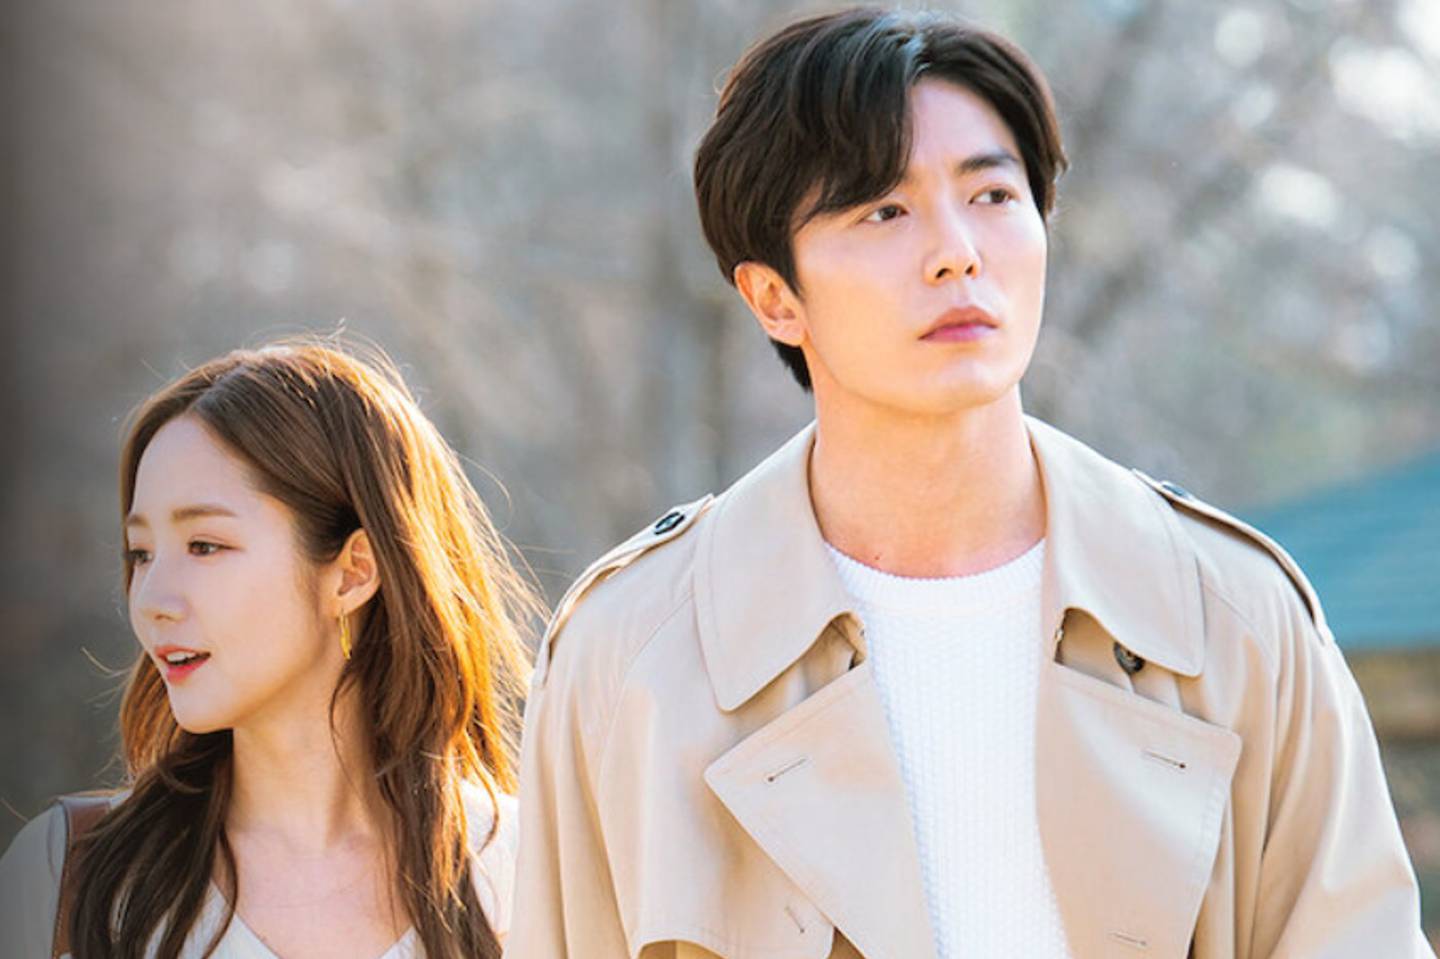 Private life is. Her private Life дорама платочек. Private Life. Her private Life Kdrama надпись. Her private Life 2019.